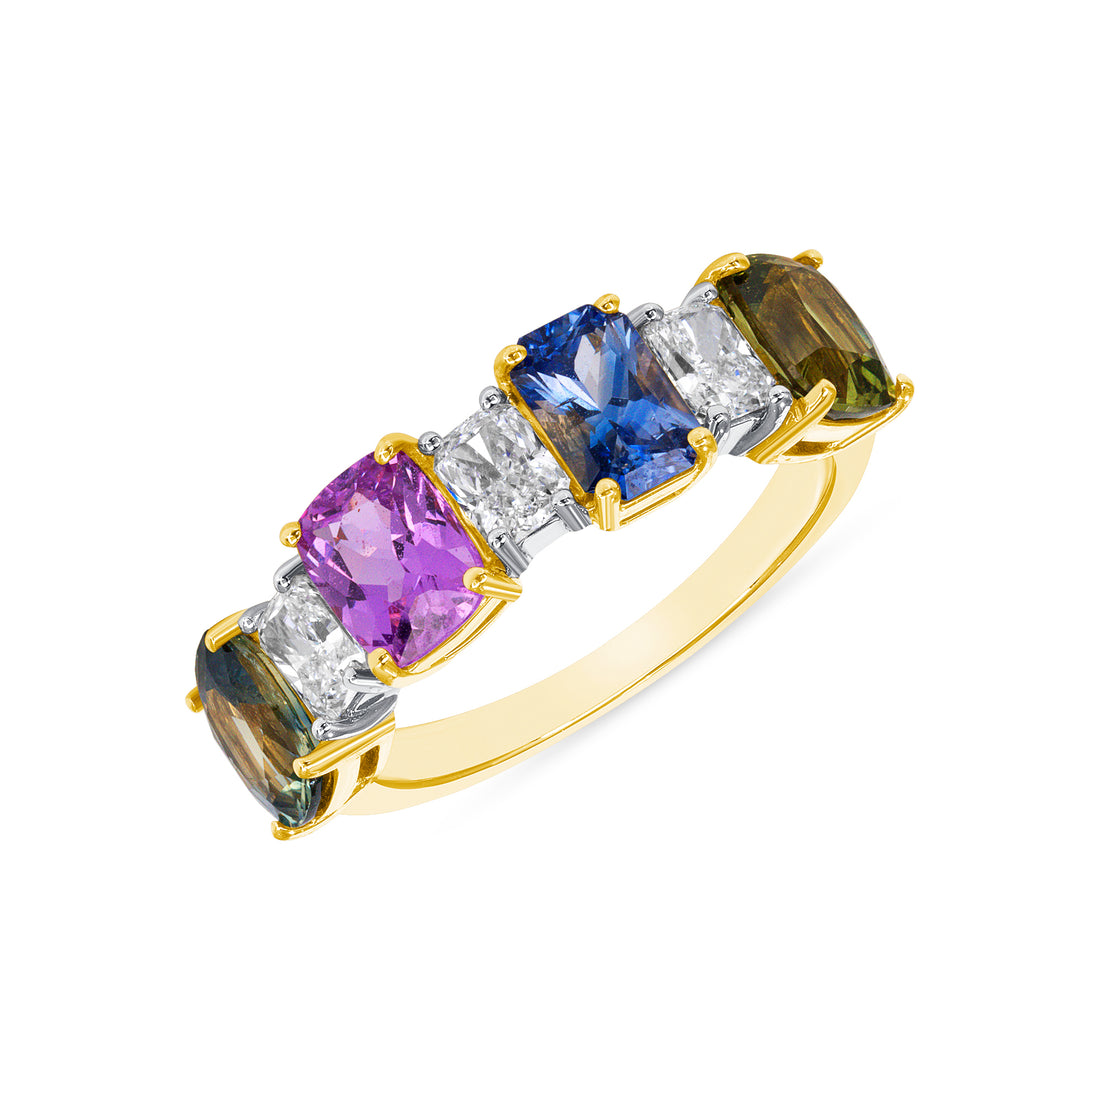 4.06 CT. Oval Cut Sapphire and Radiant Cut Diamond Half Eternity Band in 14K Yellow Gold